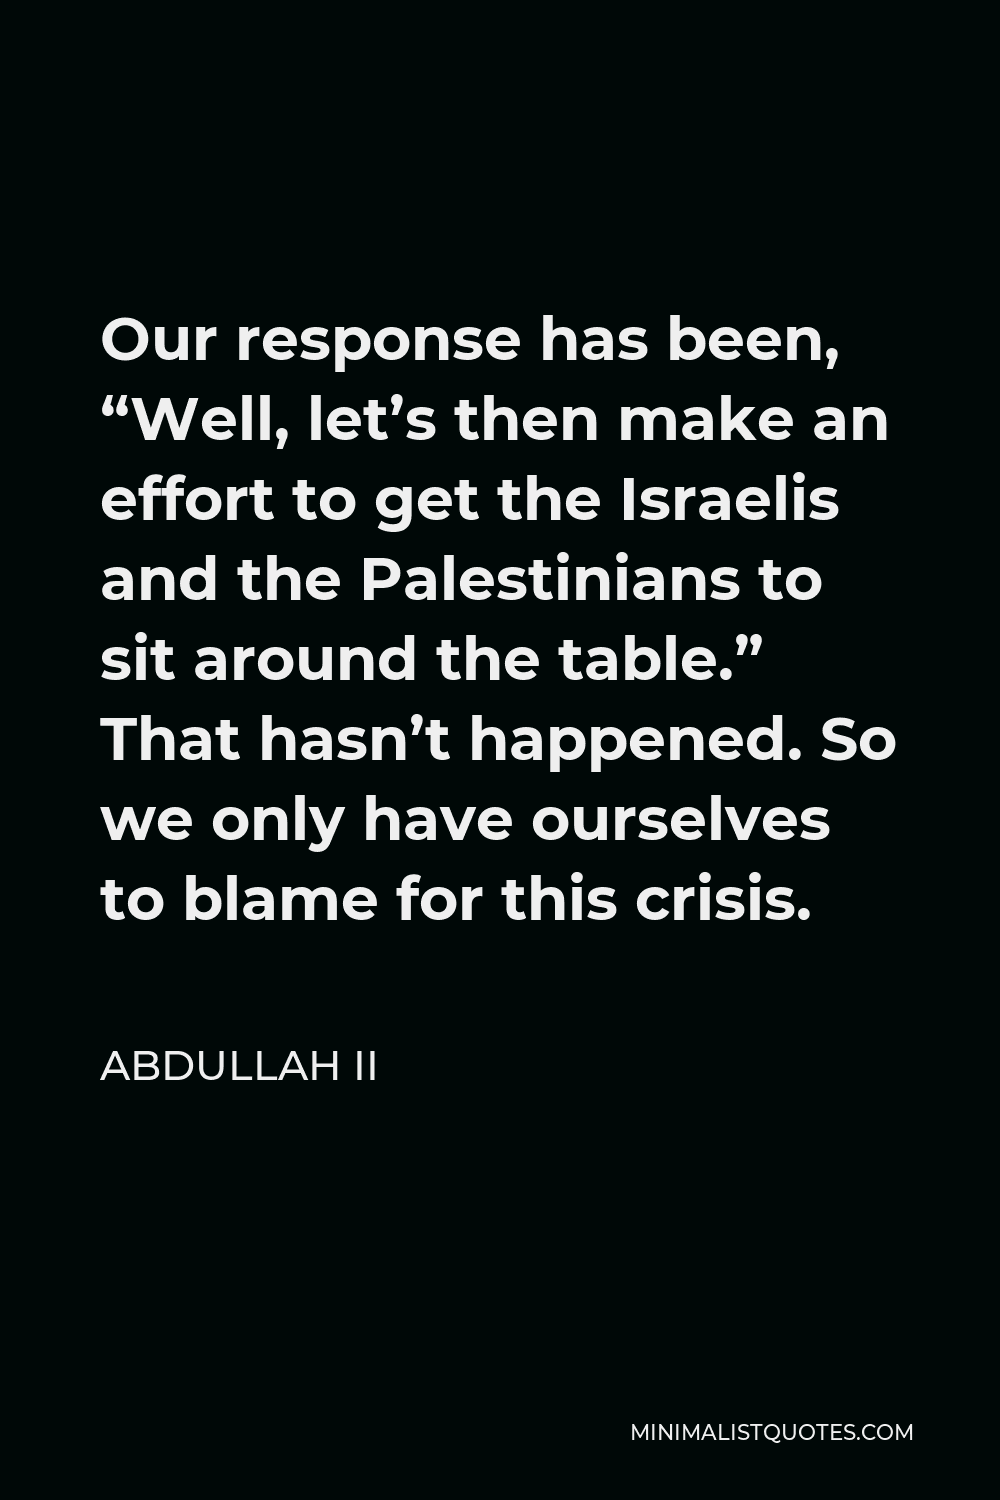 Abdullah II Quote - Our response has been, “Well, let’s then make an effort to get the Israelis and the Palestinians to sit around the table.” That hasn’t happened. So we only have ourselves to blame for this crisis.